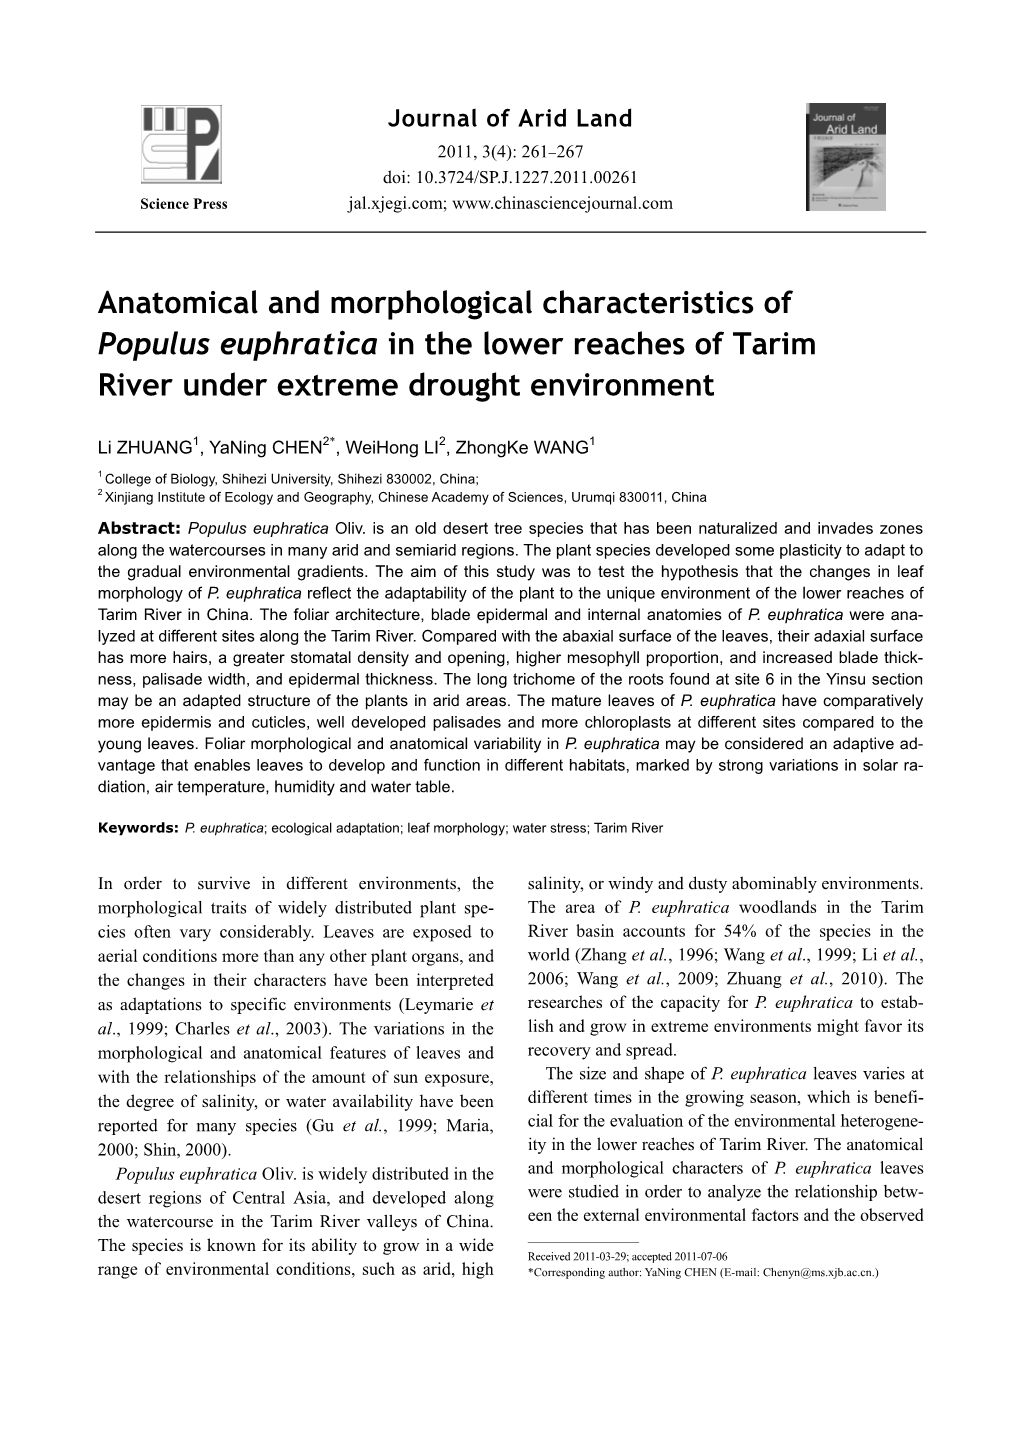 Anatomical and Morphological Characteristics of Populus Euphratica in the Lower Reaches of Tarim River Under Extreme Drought Environment